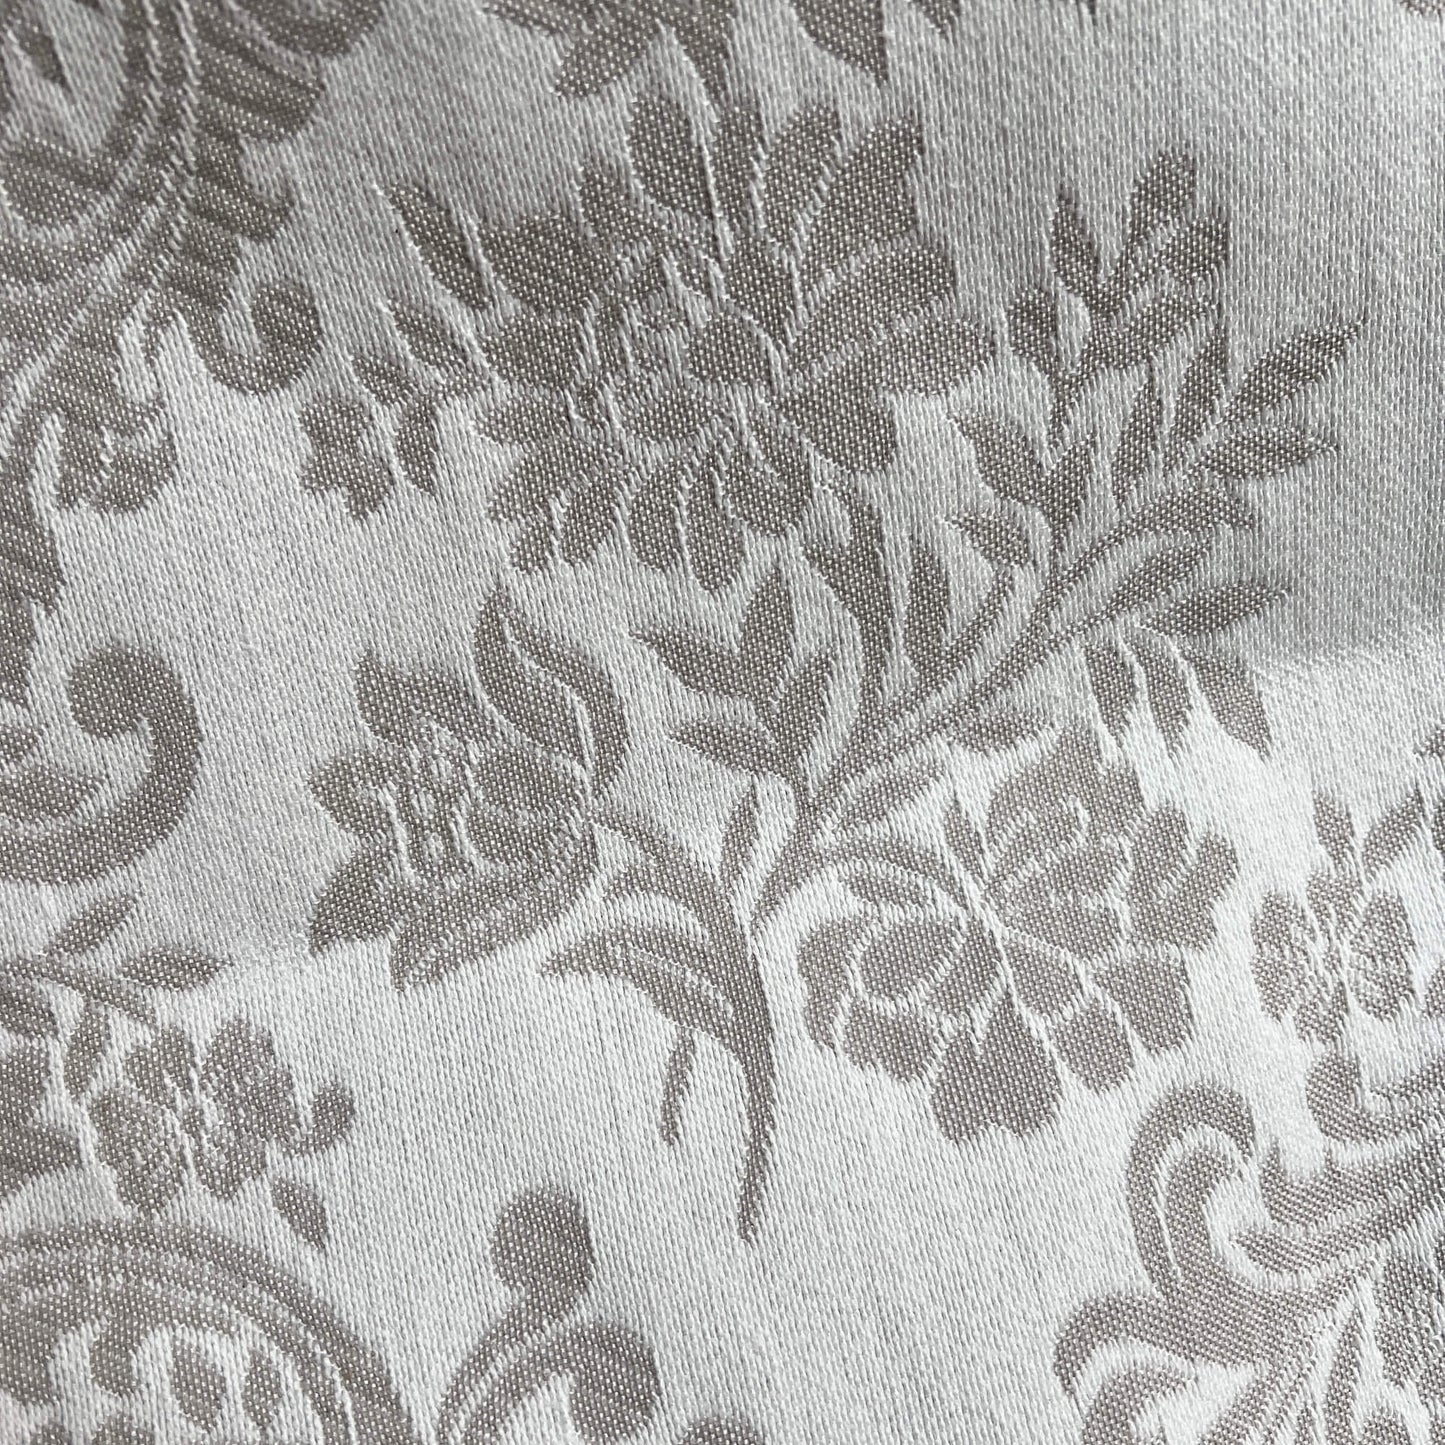 Fabric by the meter - Cotton - Jacquard flowers